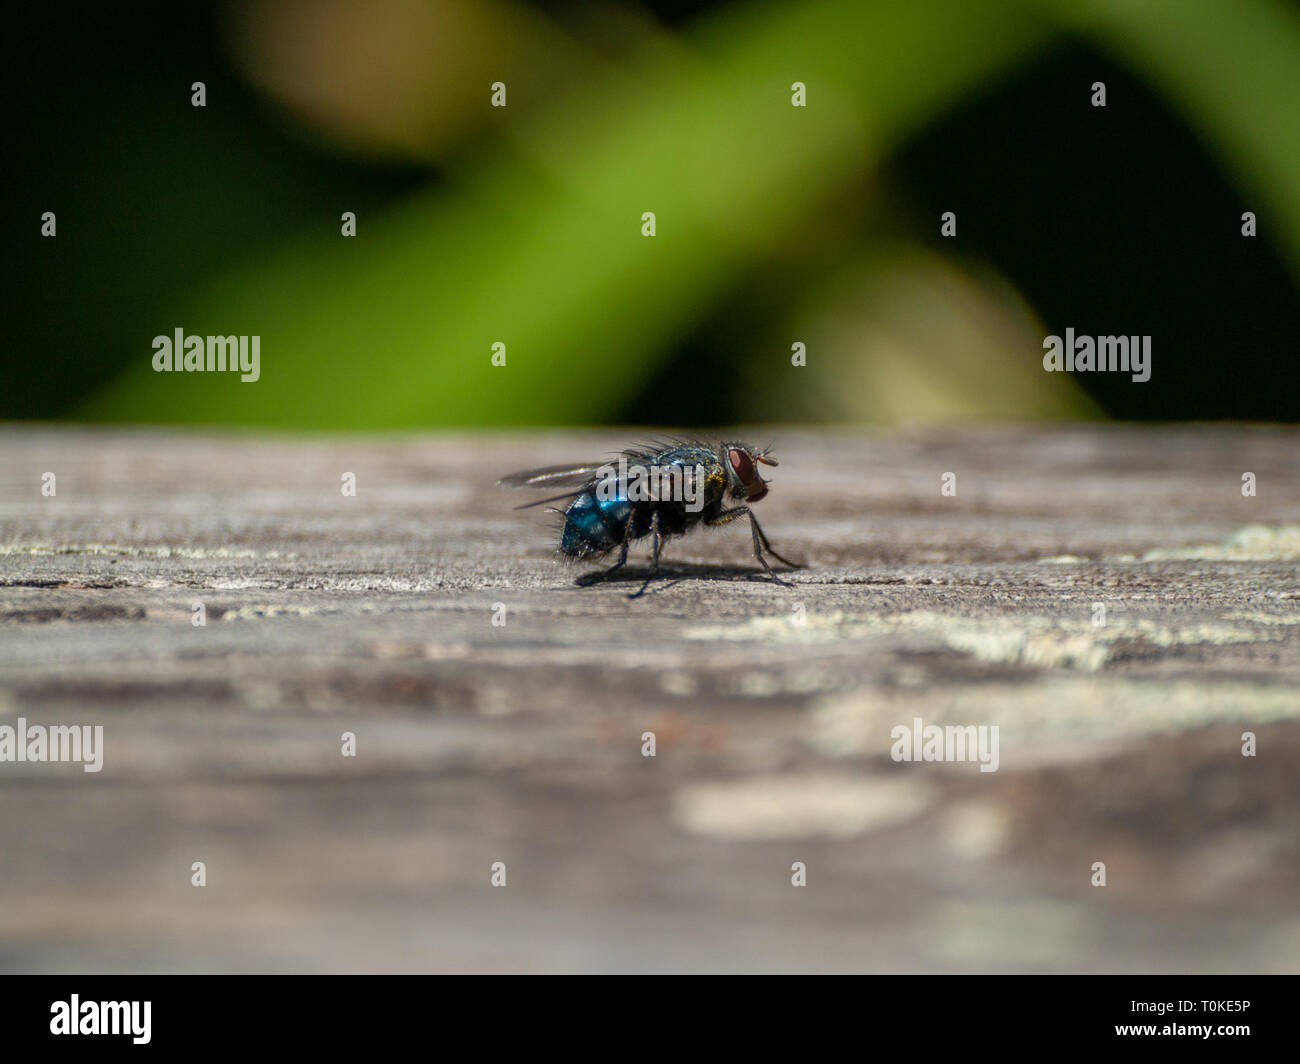 A fly perched on an old wooden board Stock Photo